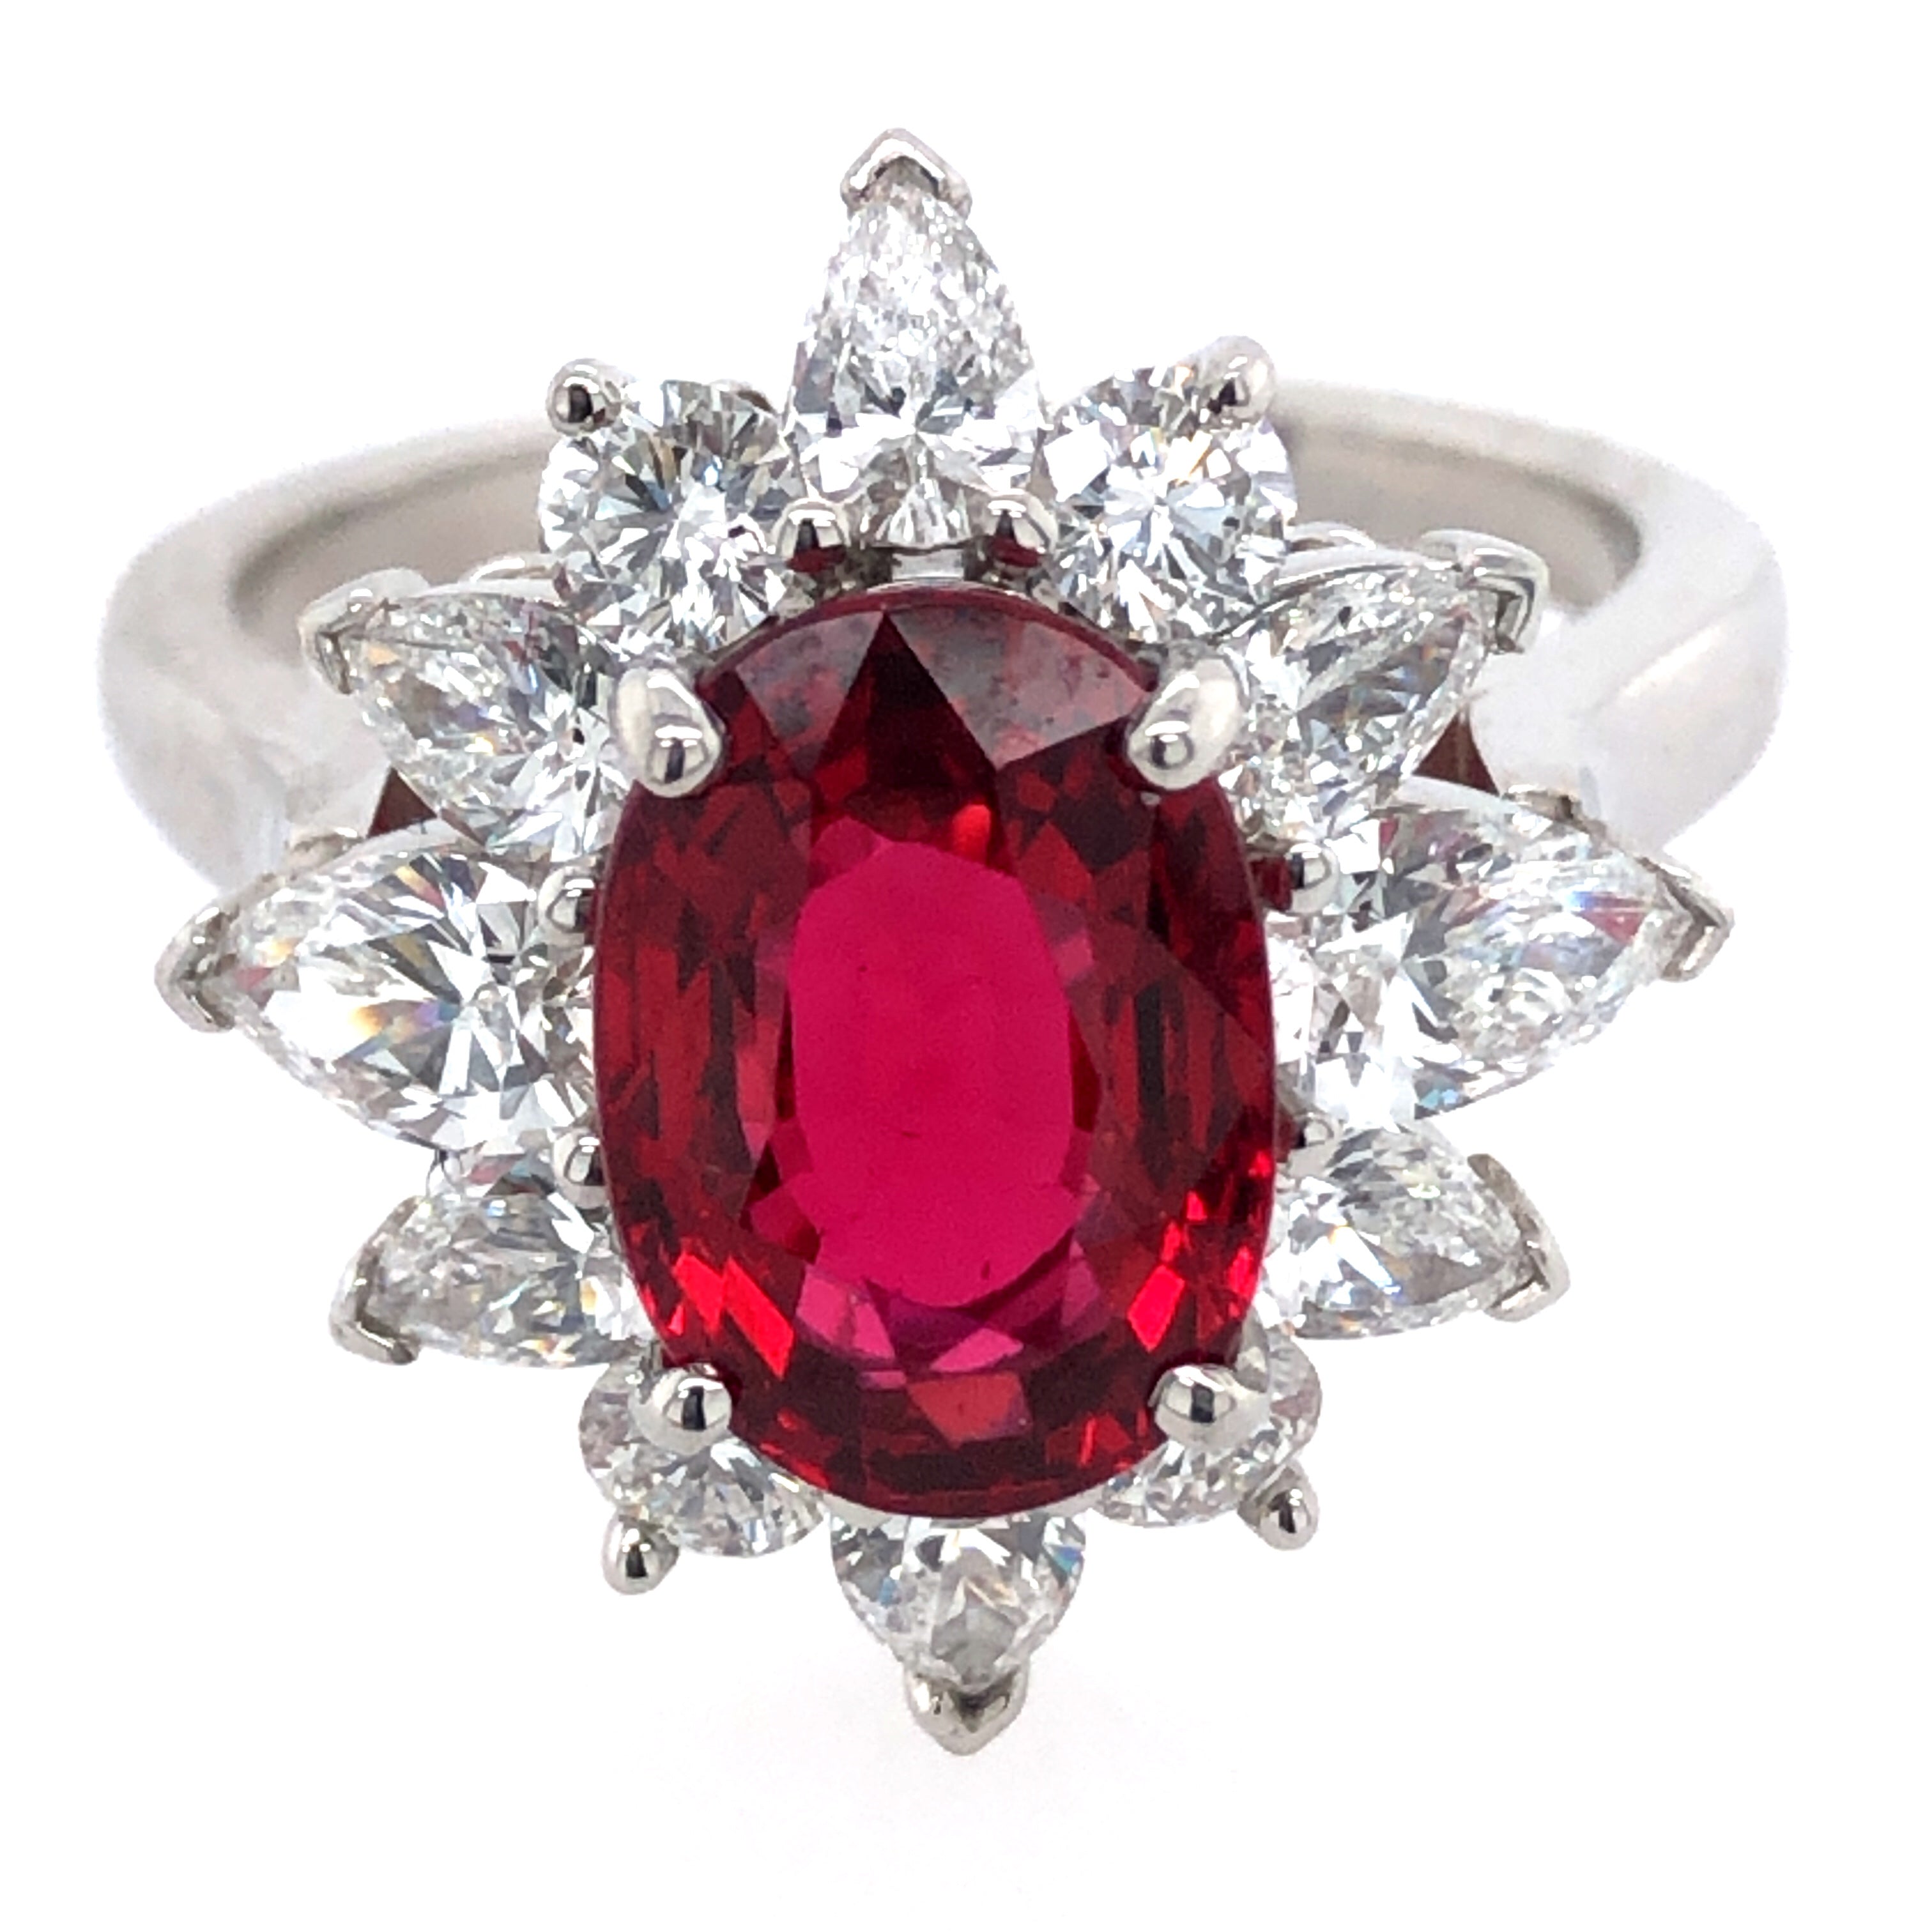 Radiant Spinel Ring - Colored Stone Rings - Womens